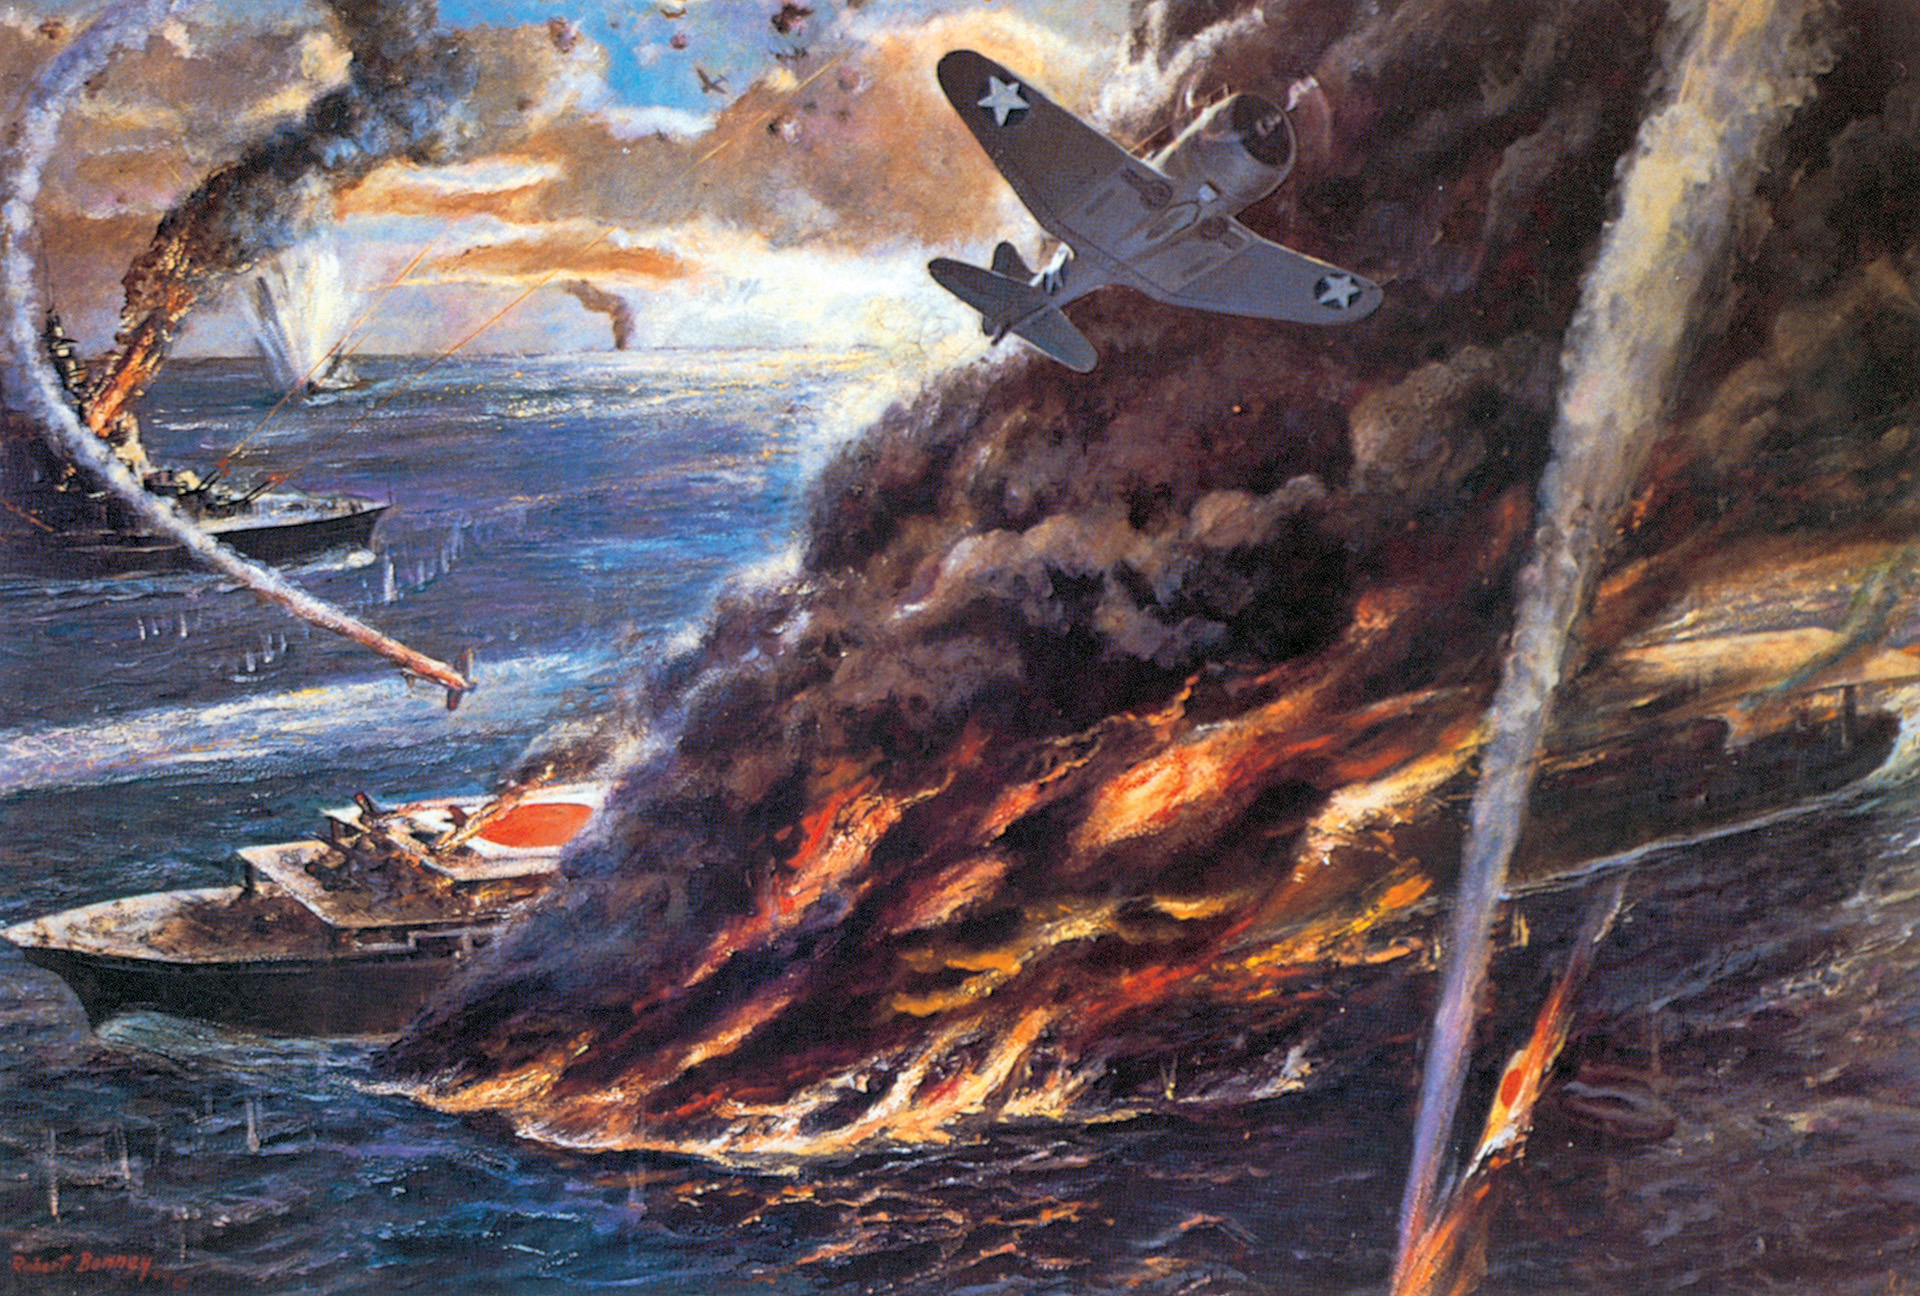 Layton helped win the great carrier battles of Coral Sea and Midway by determining where the Japanese were headed for attack.